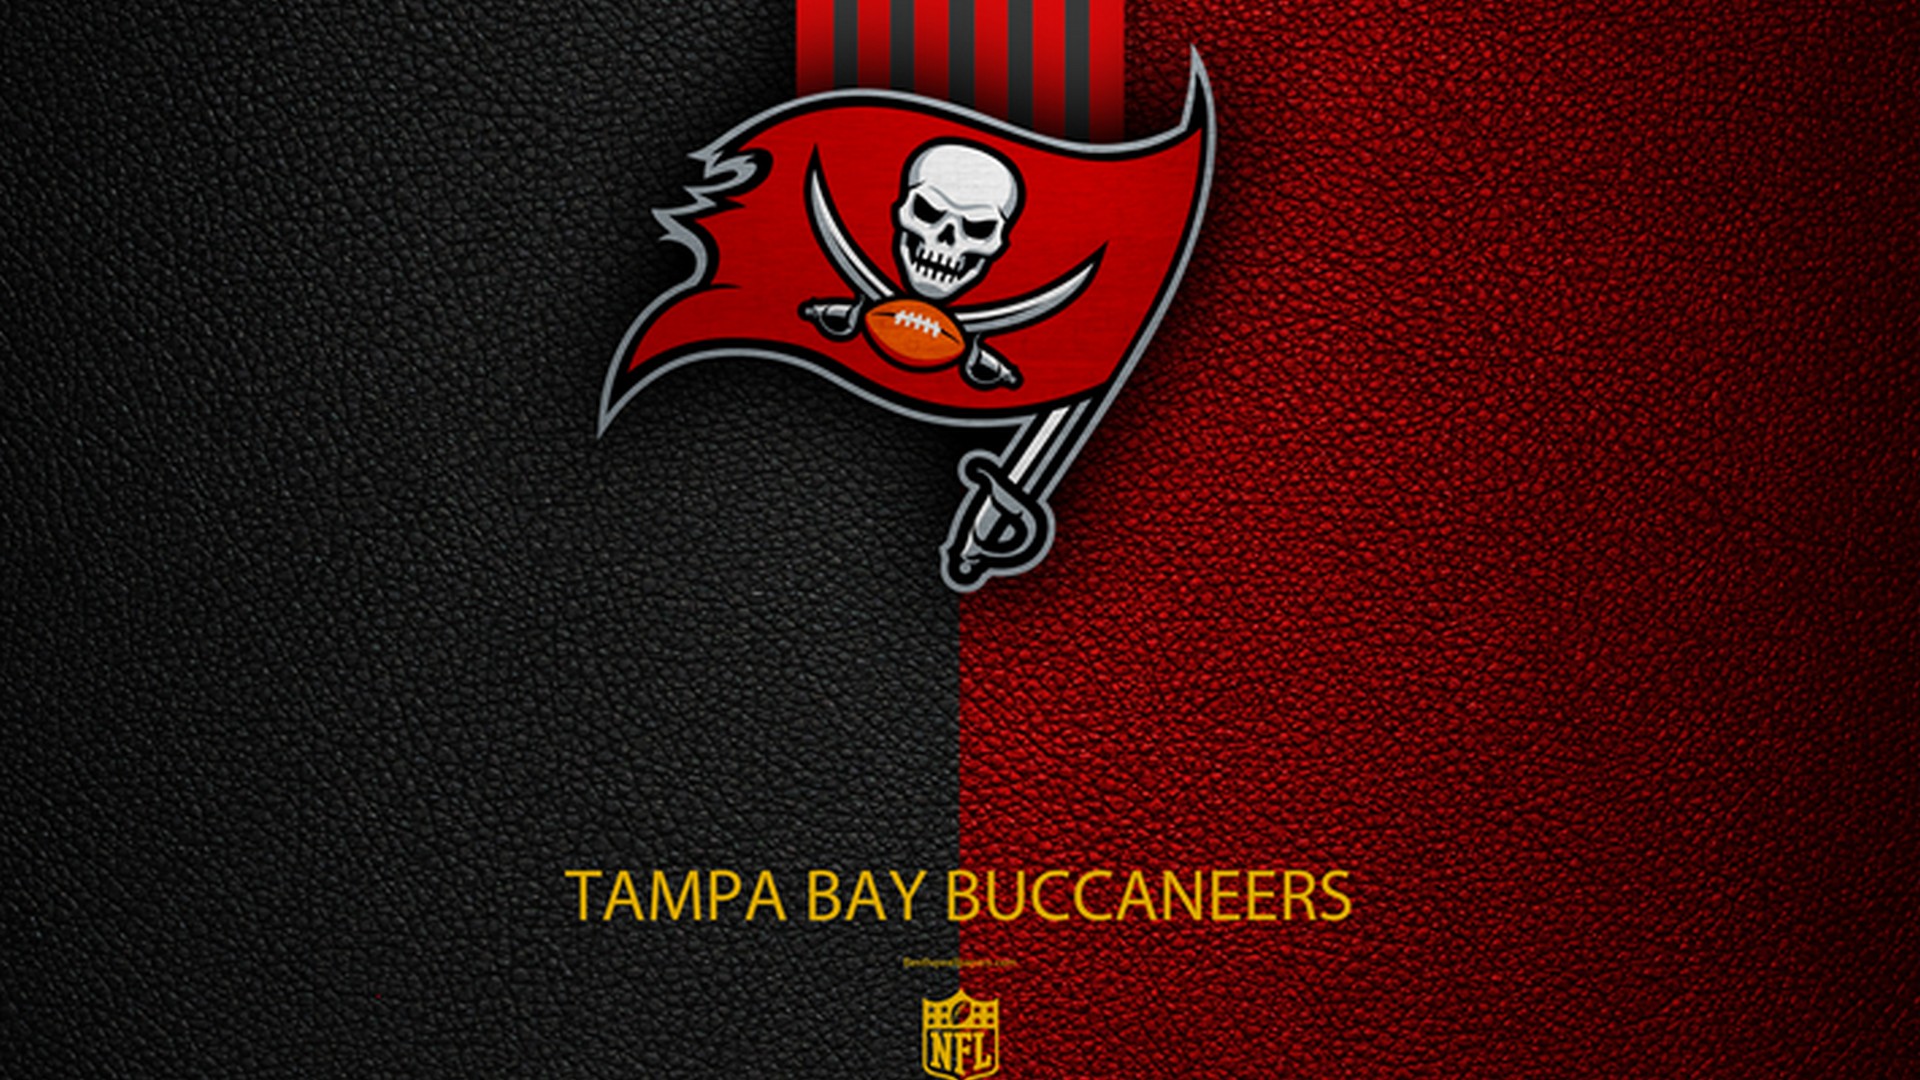 Tampa Bay Buccaneers Wallpaper For Mac Backgrounds With high-resolution 1920X1080 pixel. You can use this wallpaper for your Mac or Windows Desktop Background, iPhone, Android or Tablet and another Smartphone device